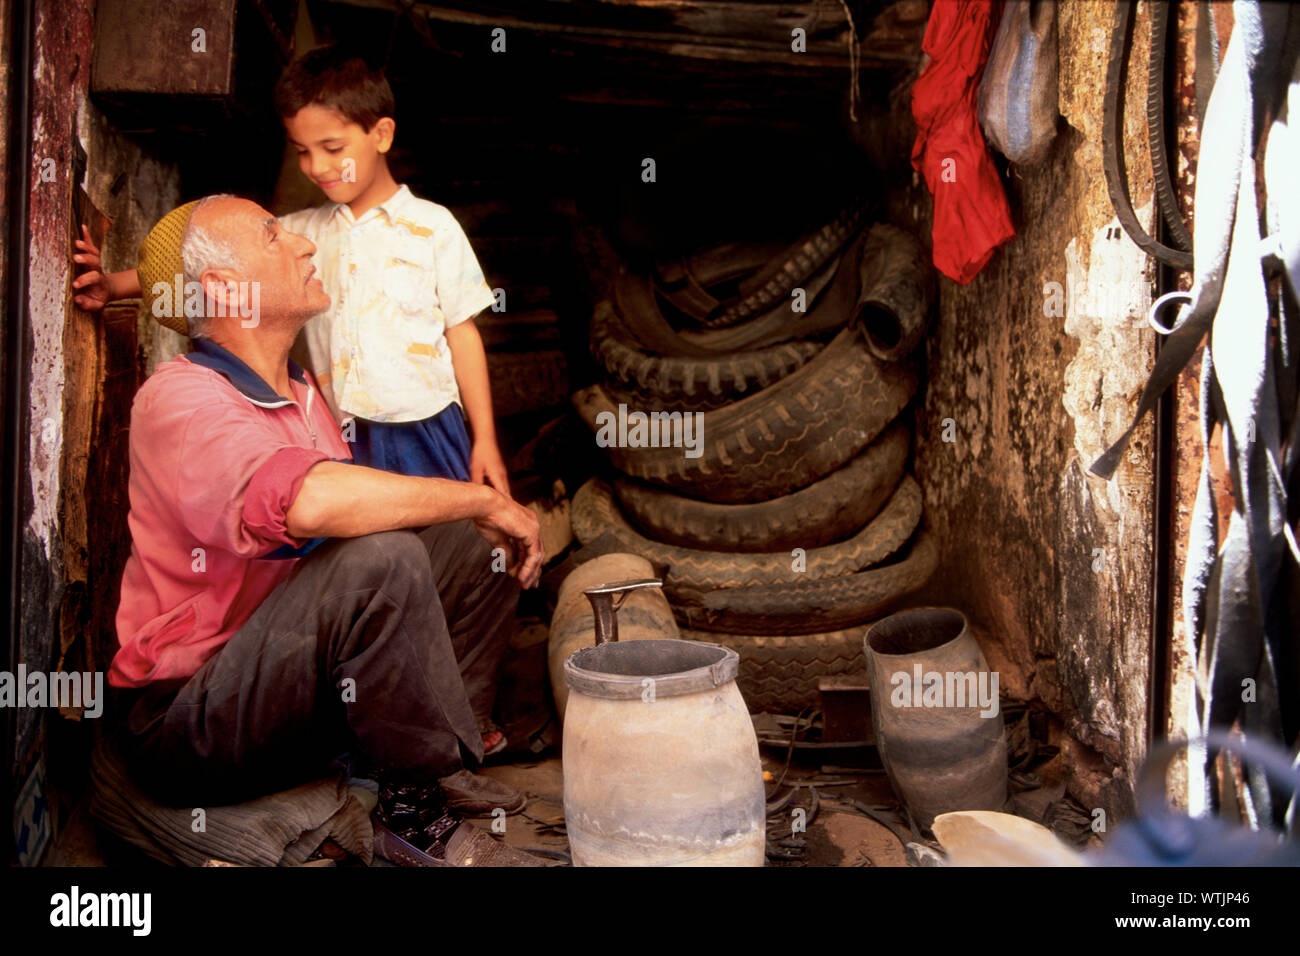 Grandfather and grandson in a repair shop. Stock Photo